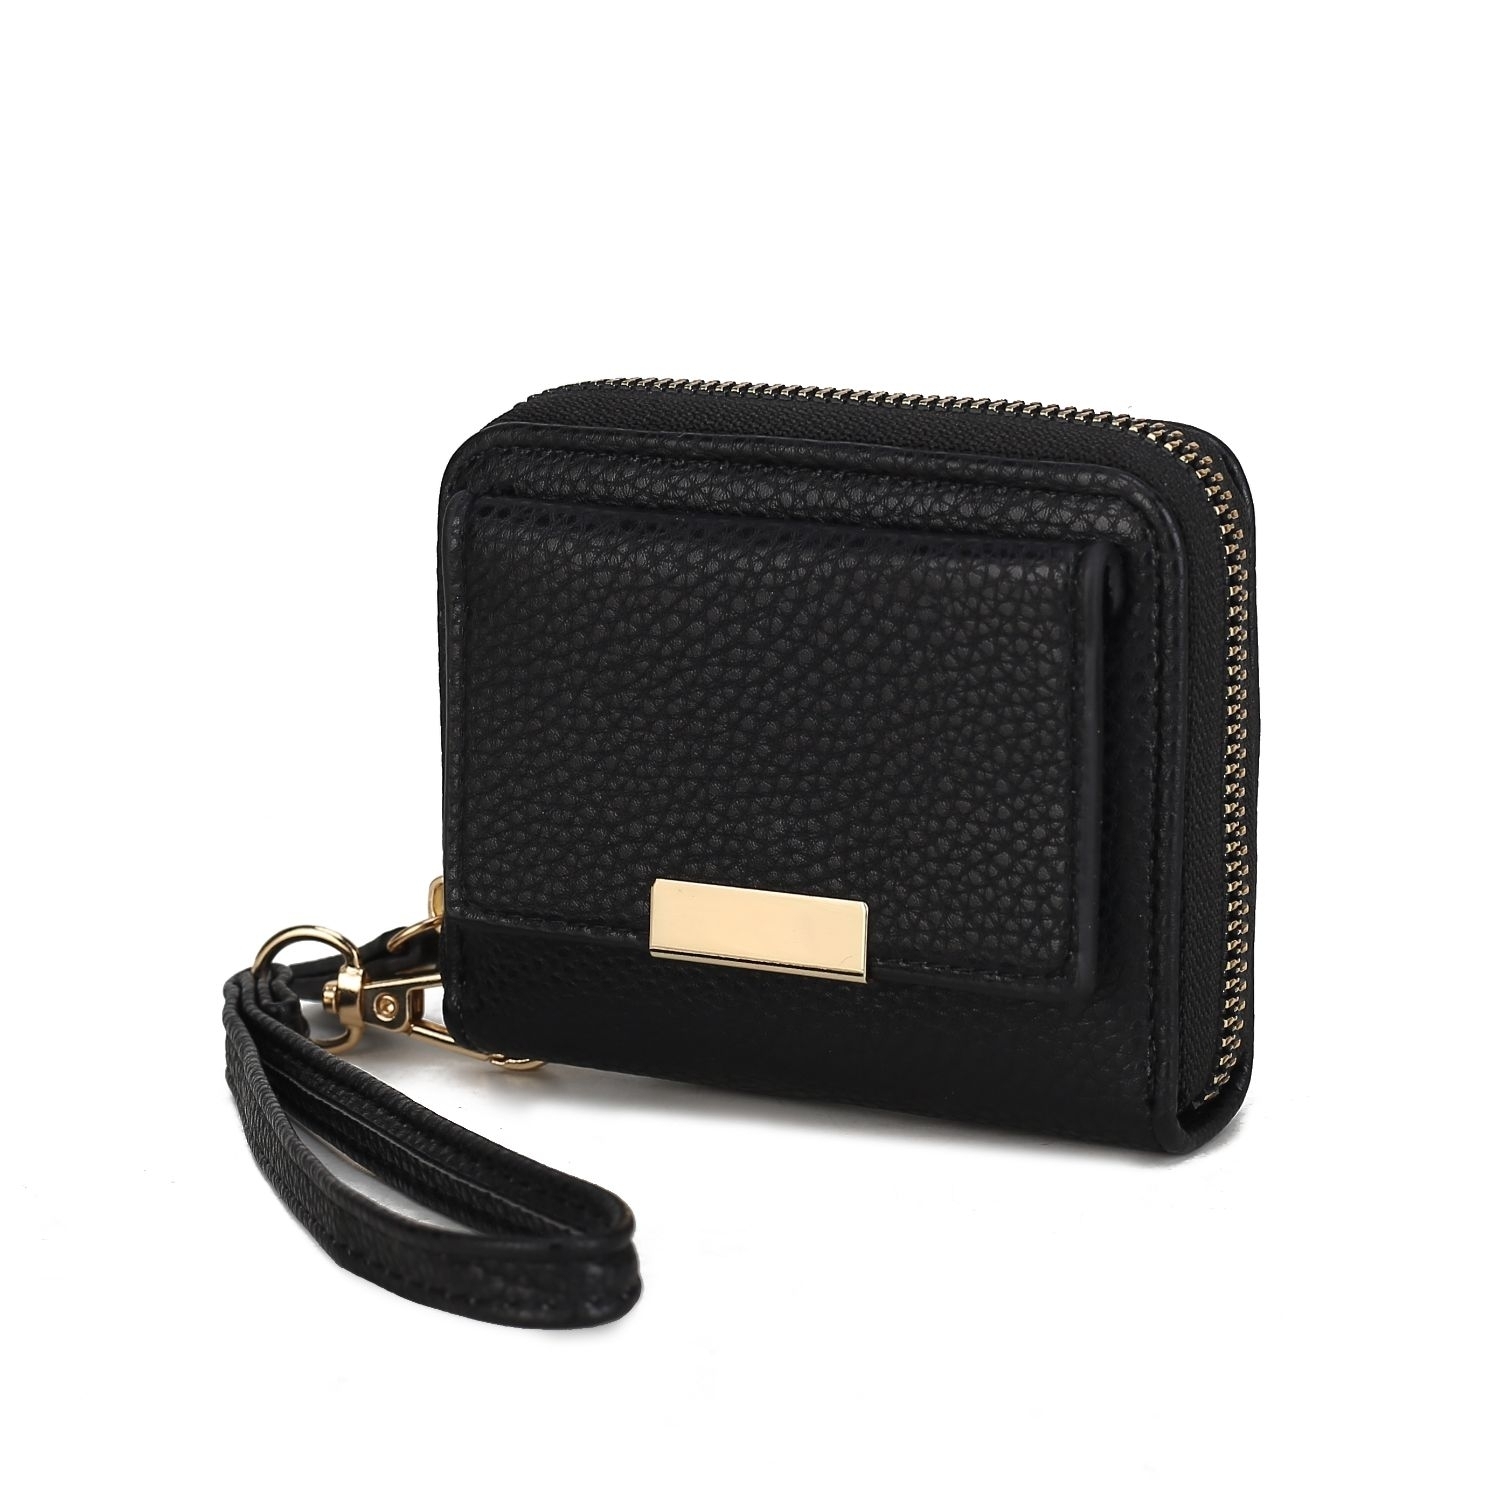 MKF Collection Izzy Small Wallet By Mia K - Cognac